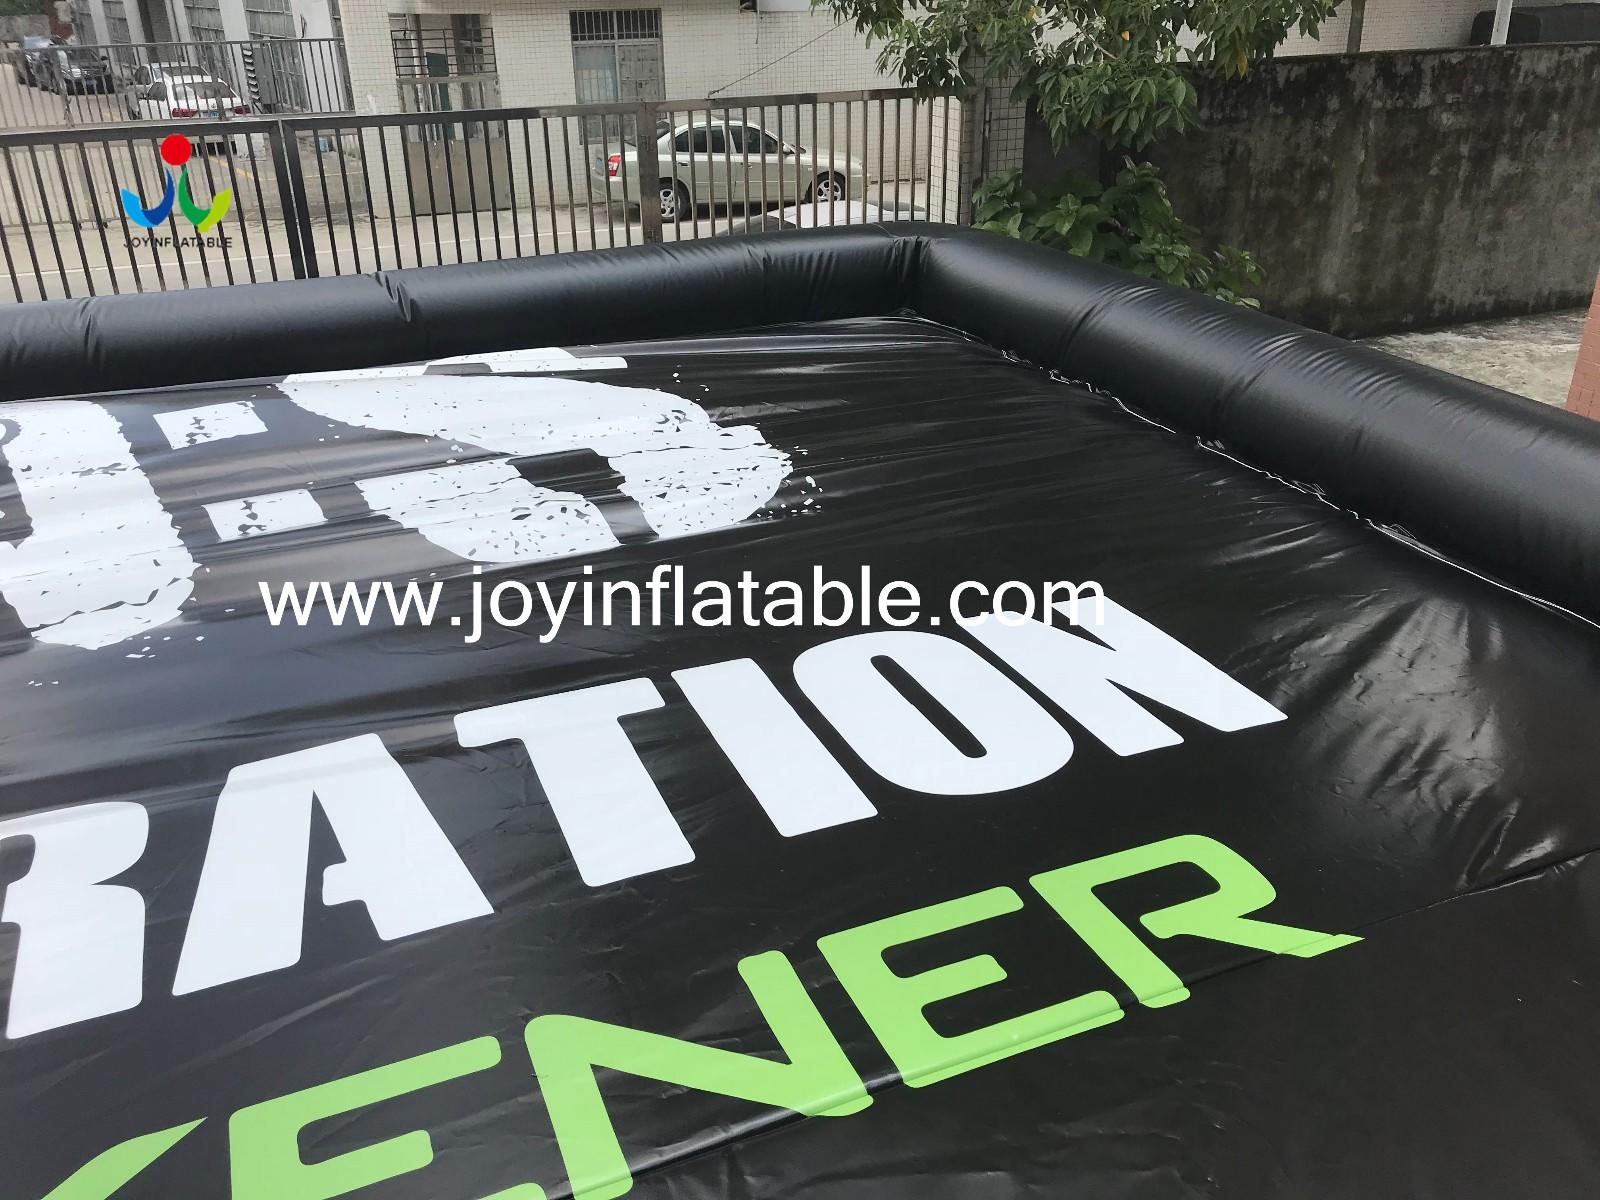 JOY inflatable mountain air pillow trampoline directly sale for kids